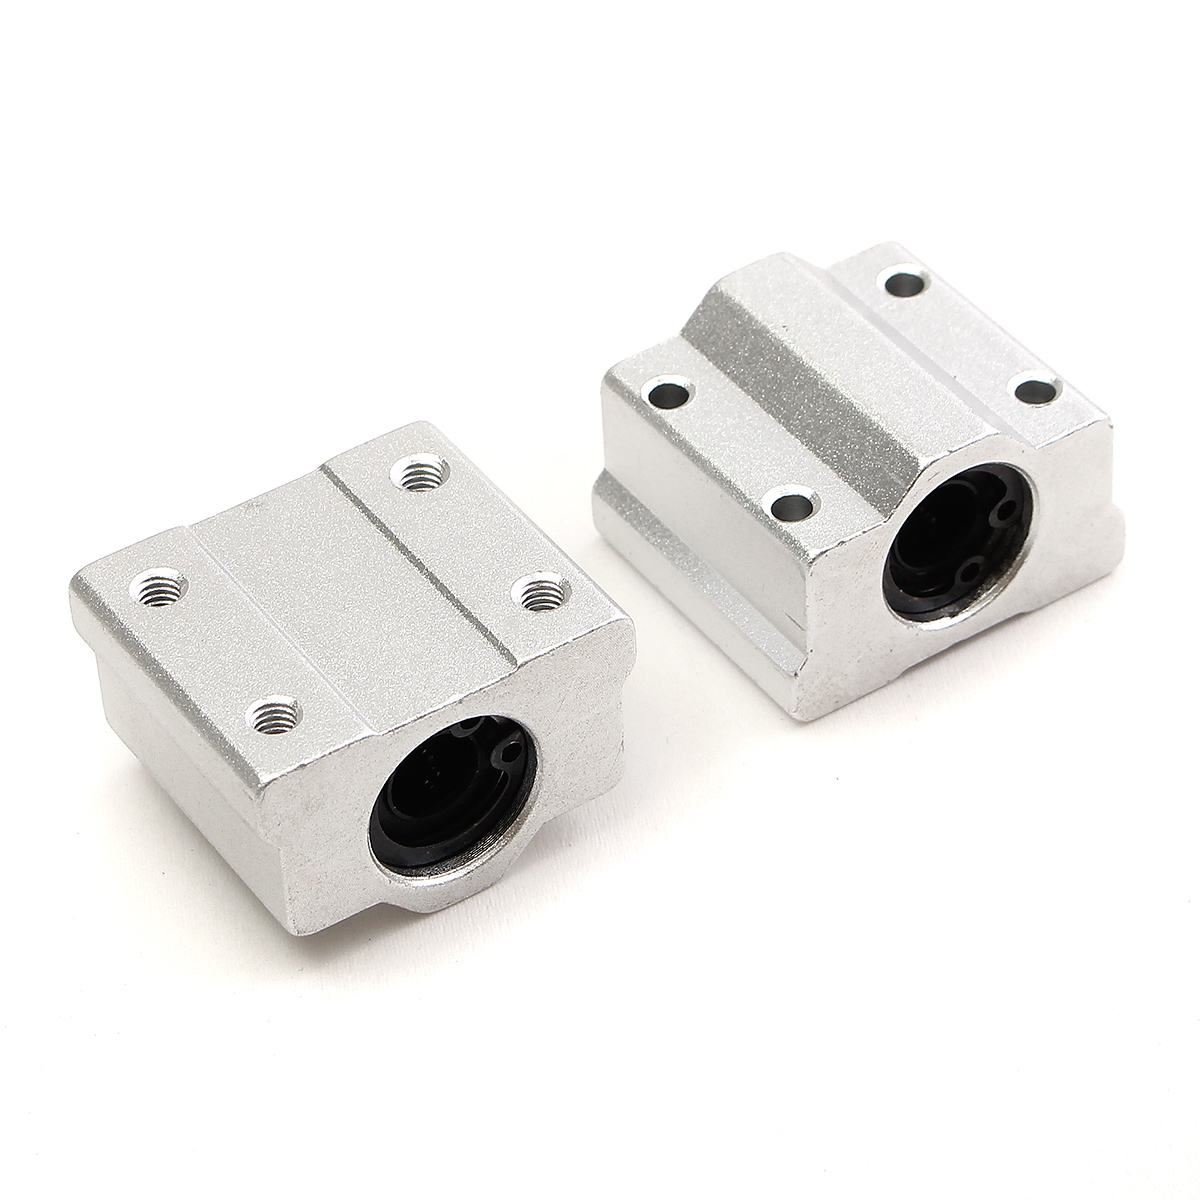 2 Set 300mm Linear Guide Rail Slide Shaft Rod With 4Pcs SCS8UU 8mm Bearing Support Block Slider For CNC Router Part